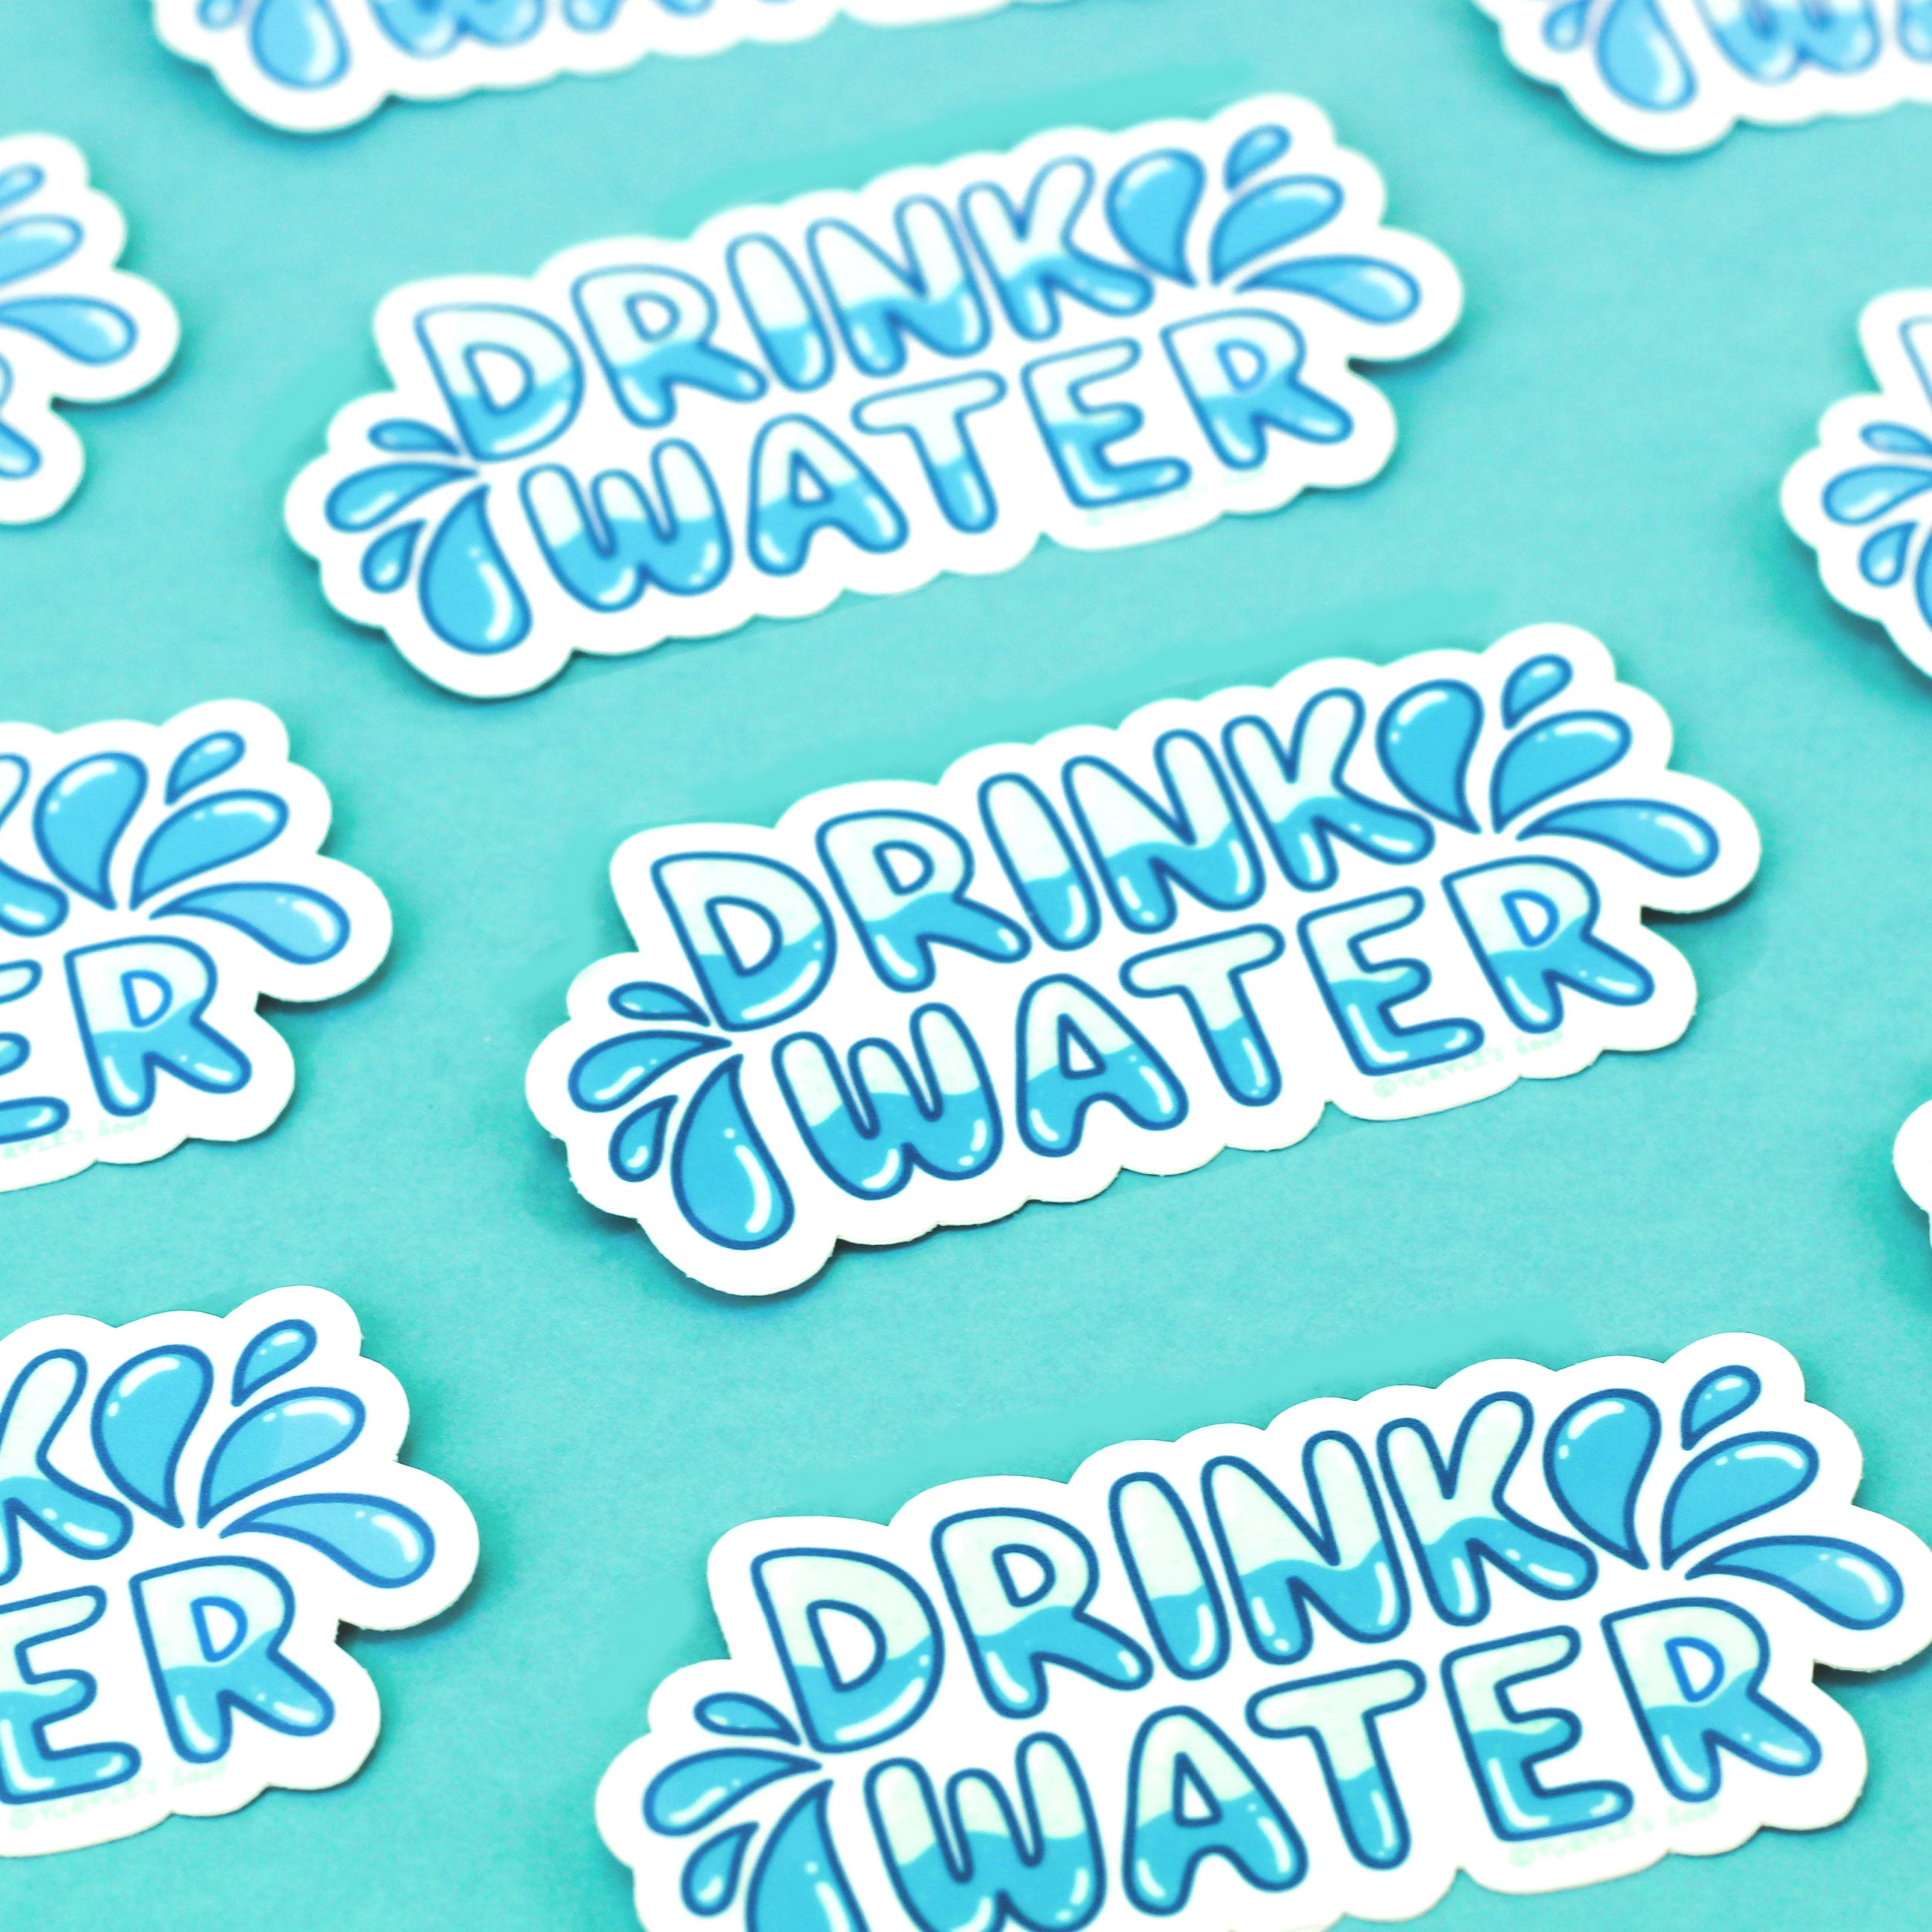 https://turtlessoup.com/cdn/shop/products/Drink-Water-Cute-Decal-Reminder-Hydrate-Adorable-Vinyl-Sticker-for-Flask-Turtles-Soup-H2O.jpg?v=1625105589